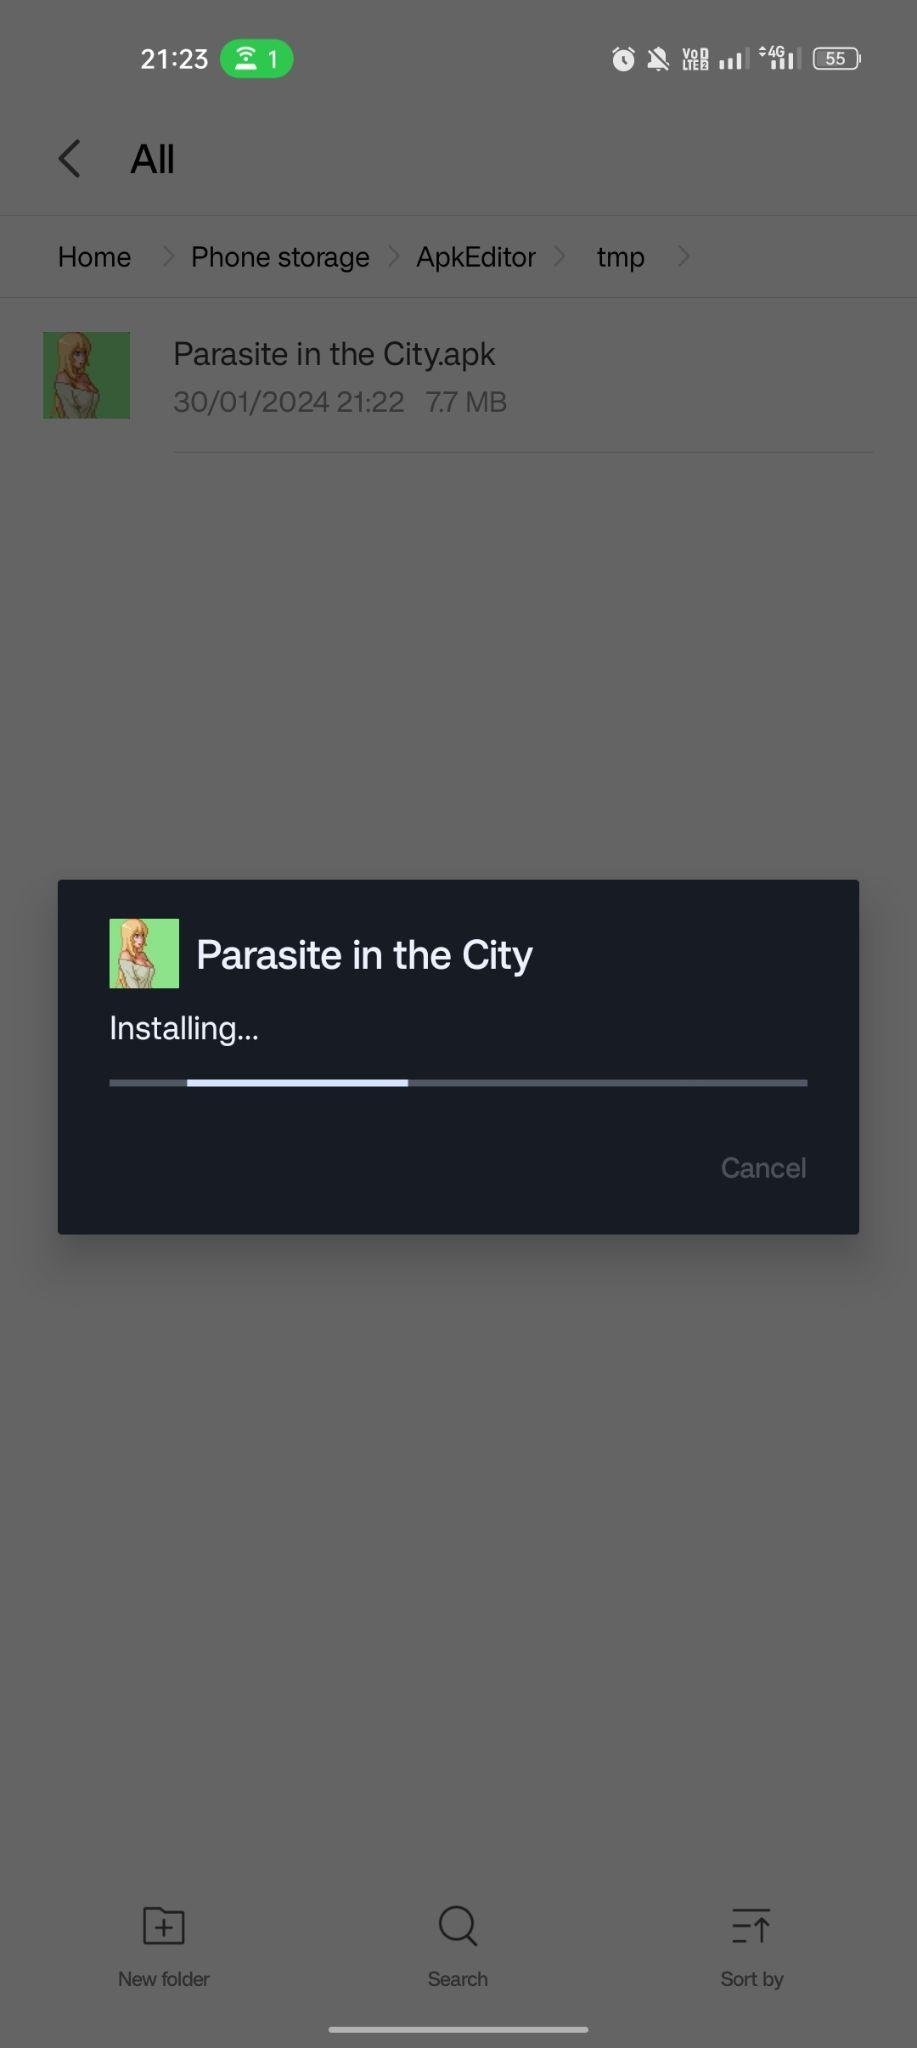 The Parasite in The City apk installing